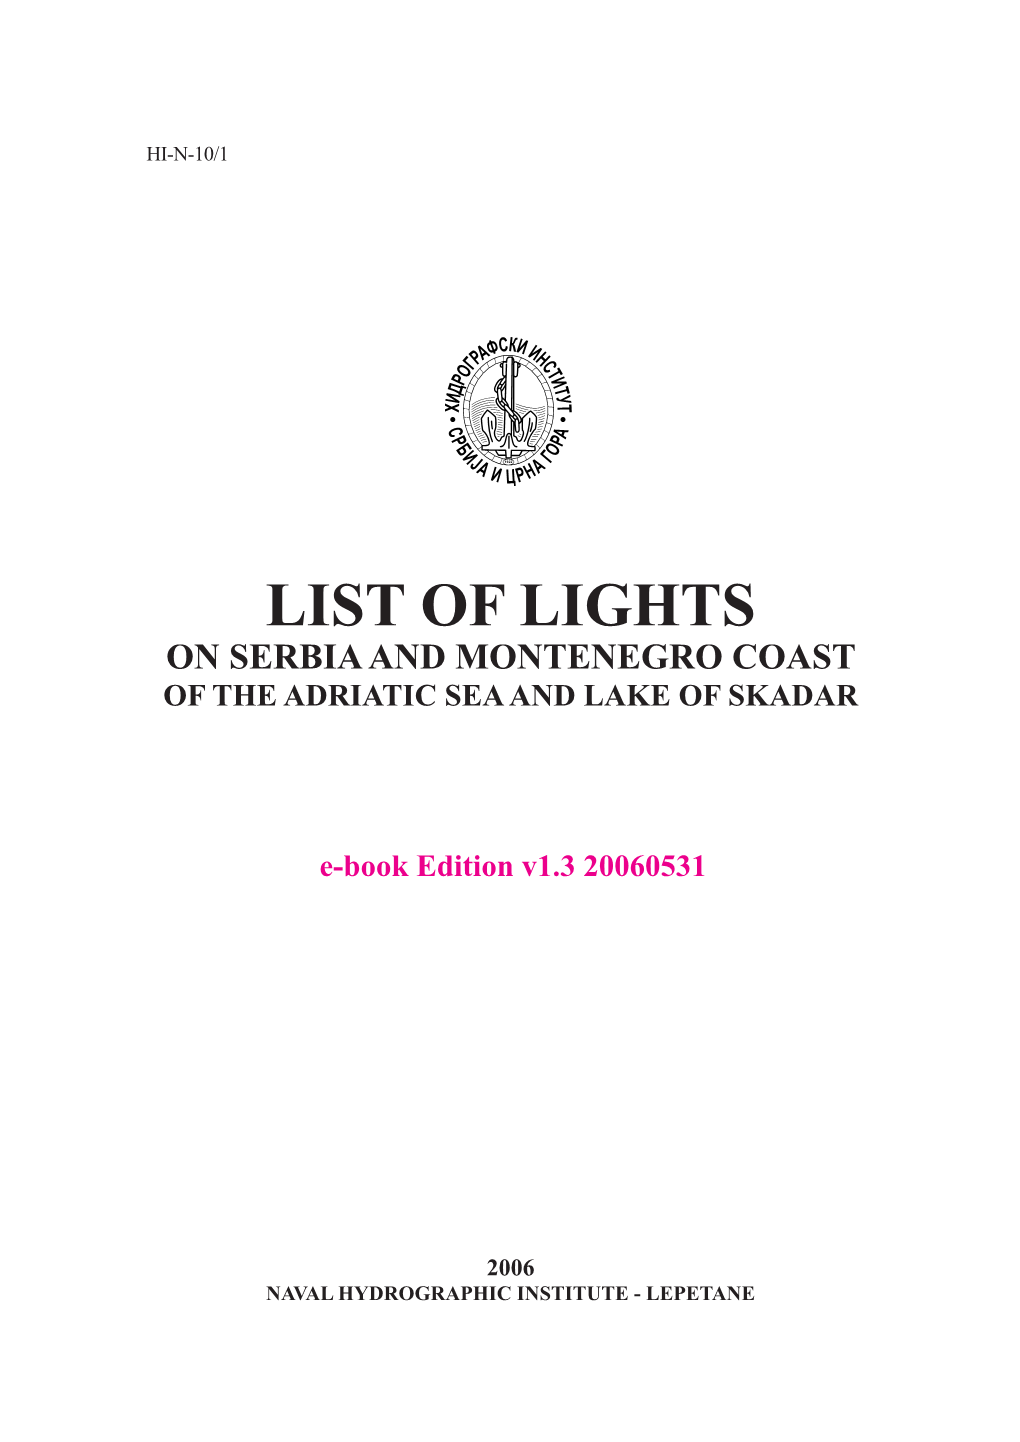 List of Lights on Serbia and Montenegro Coast of the Adriatic Sea and Lake of Skadar